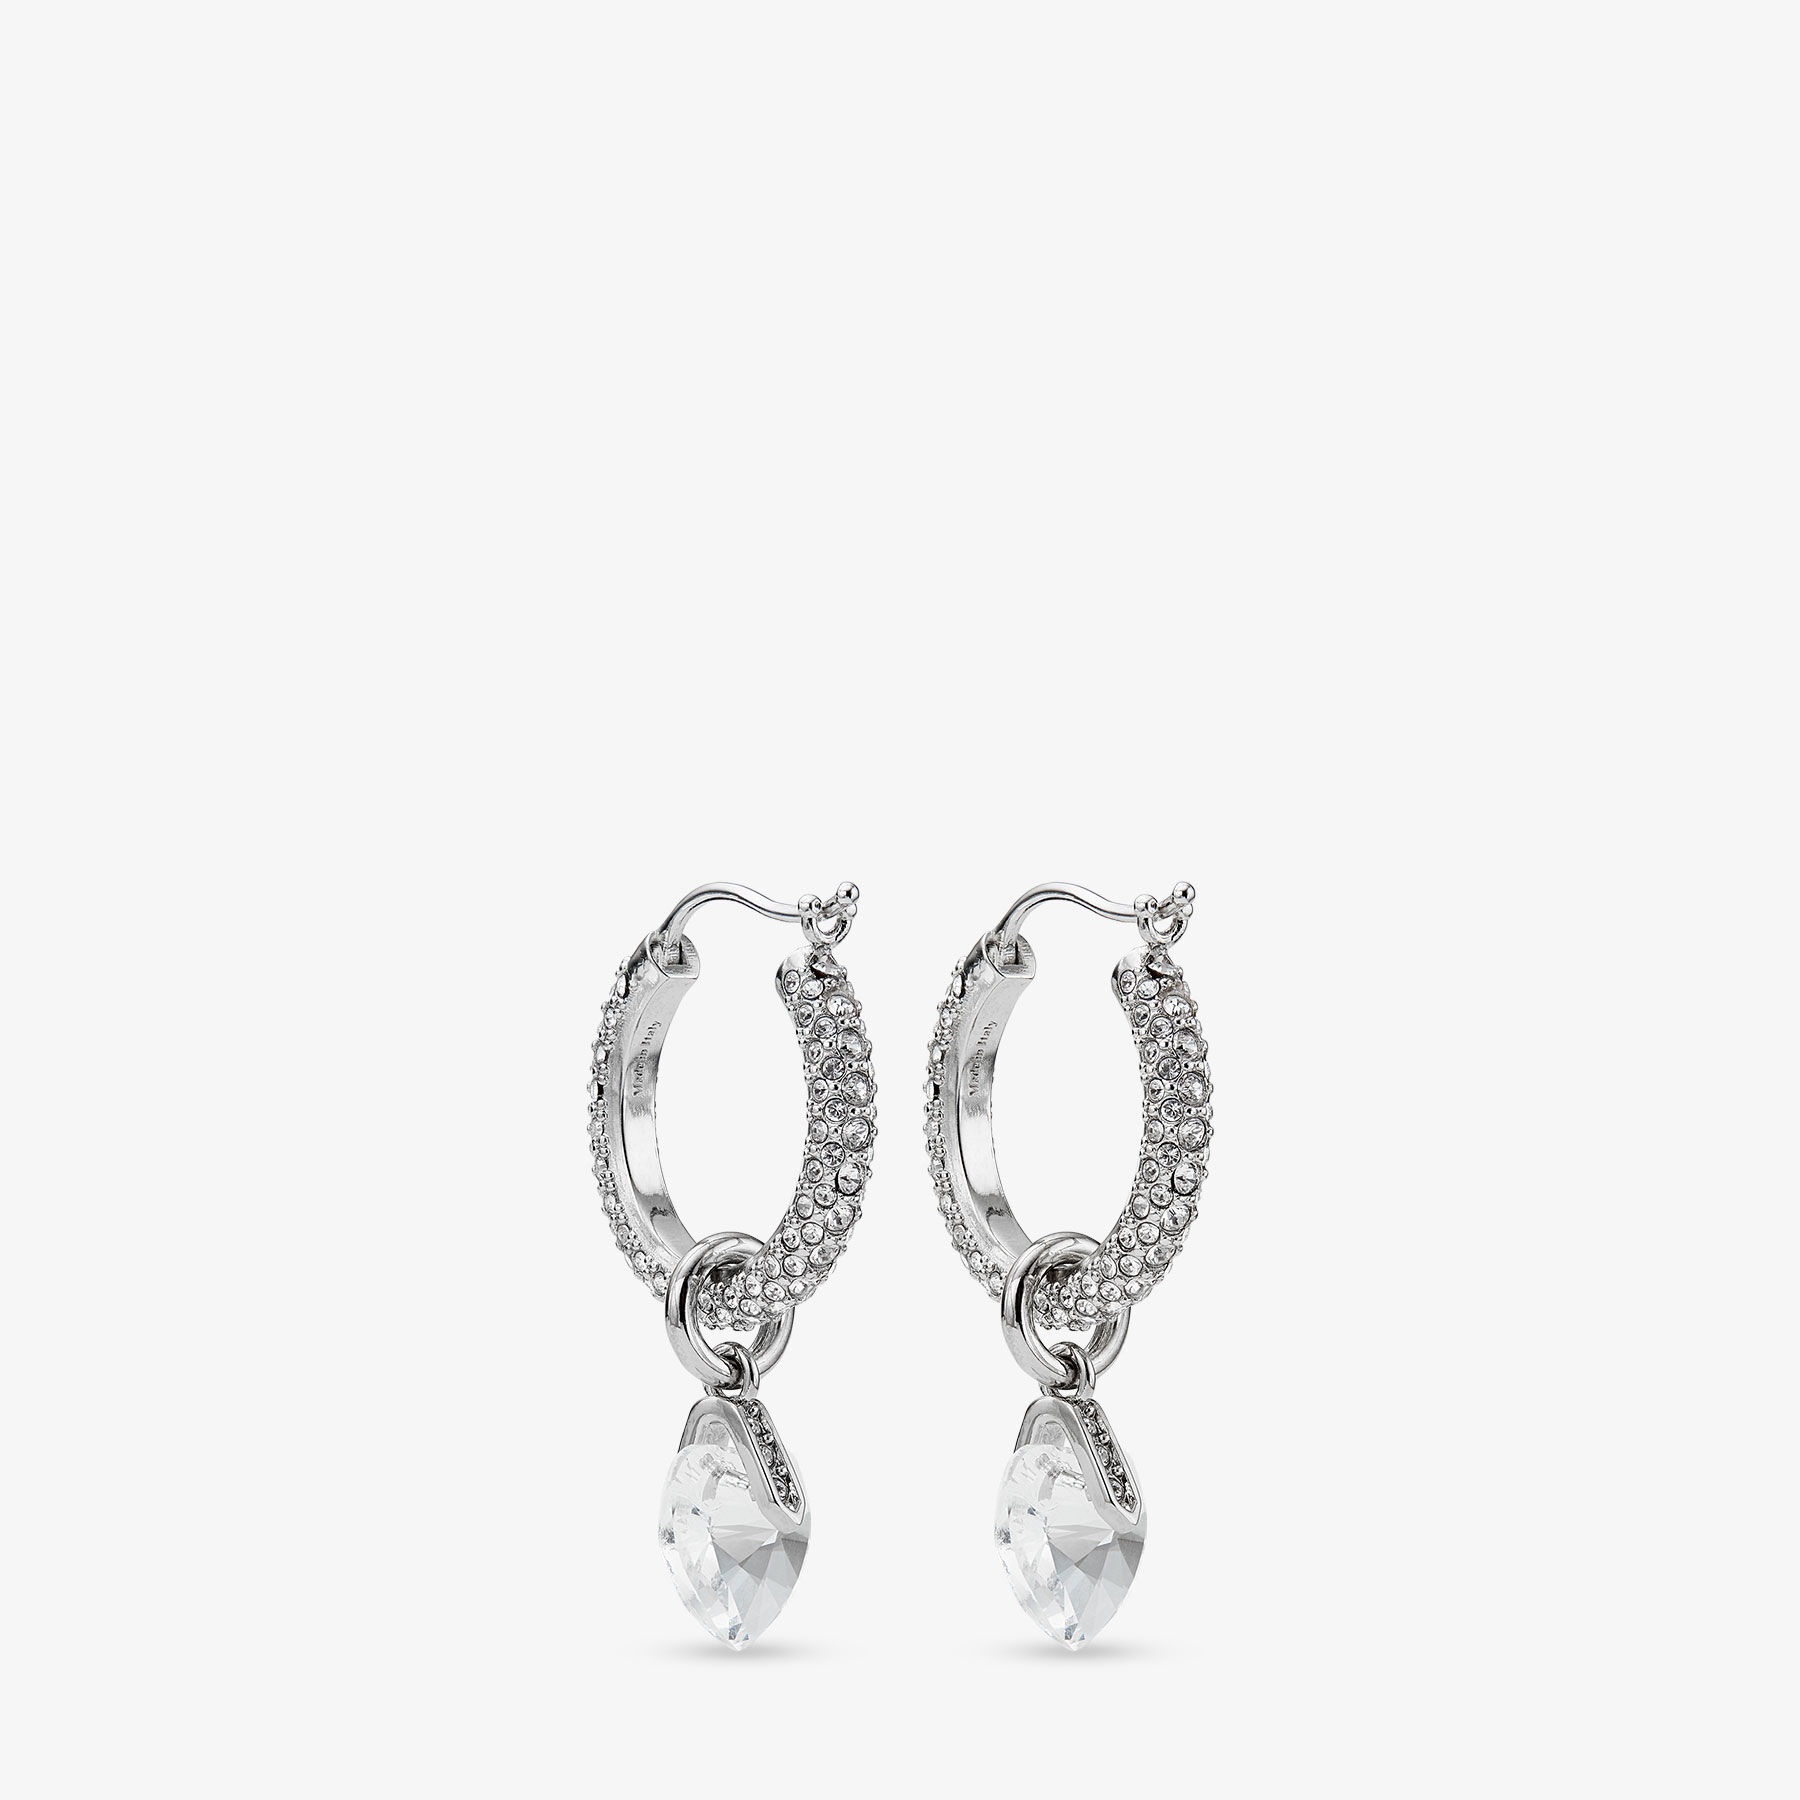 Heart Hoops
Silver-Finish Heart Hoop Earrings with Crystals - 6